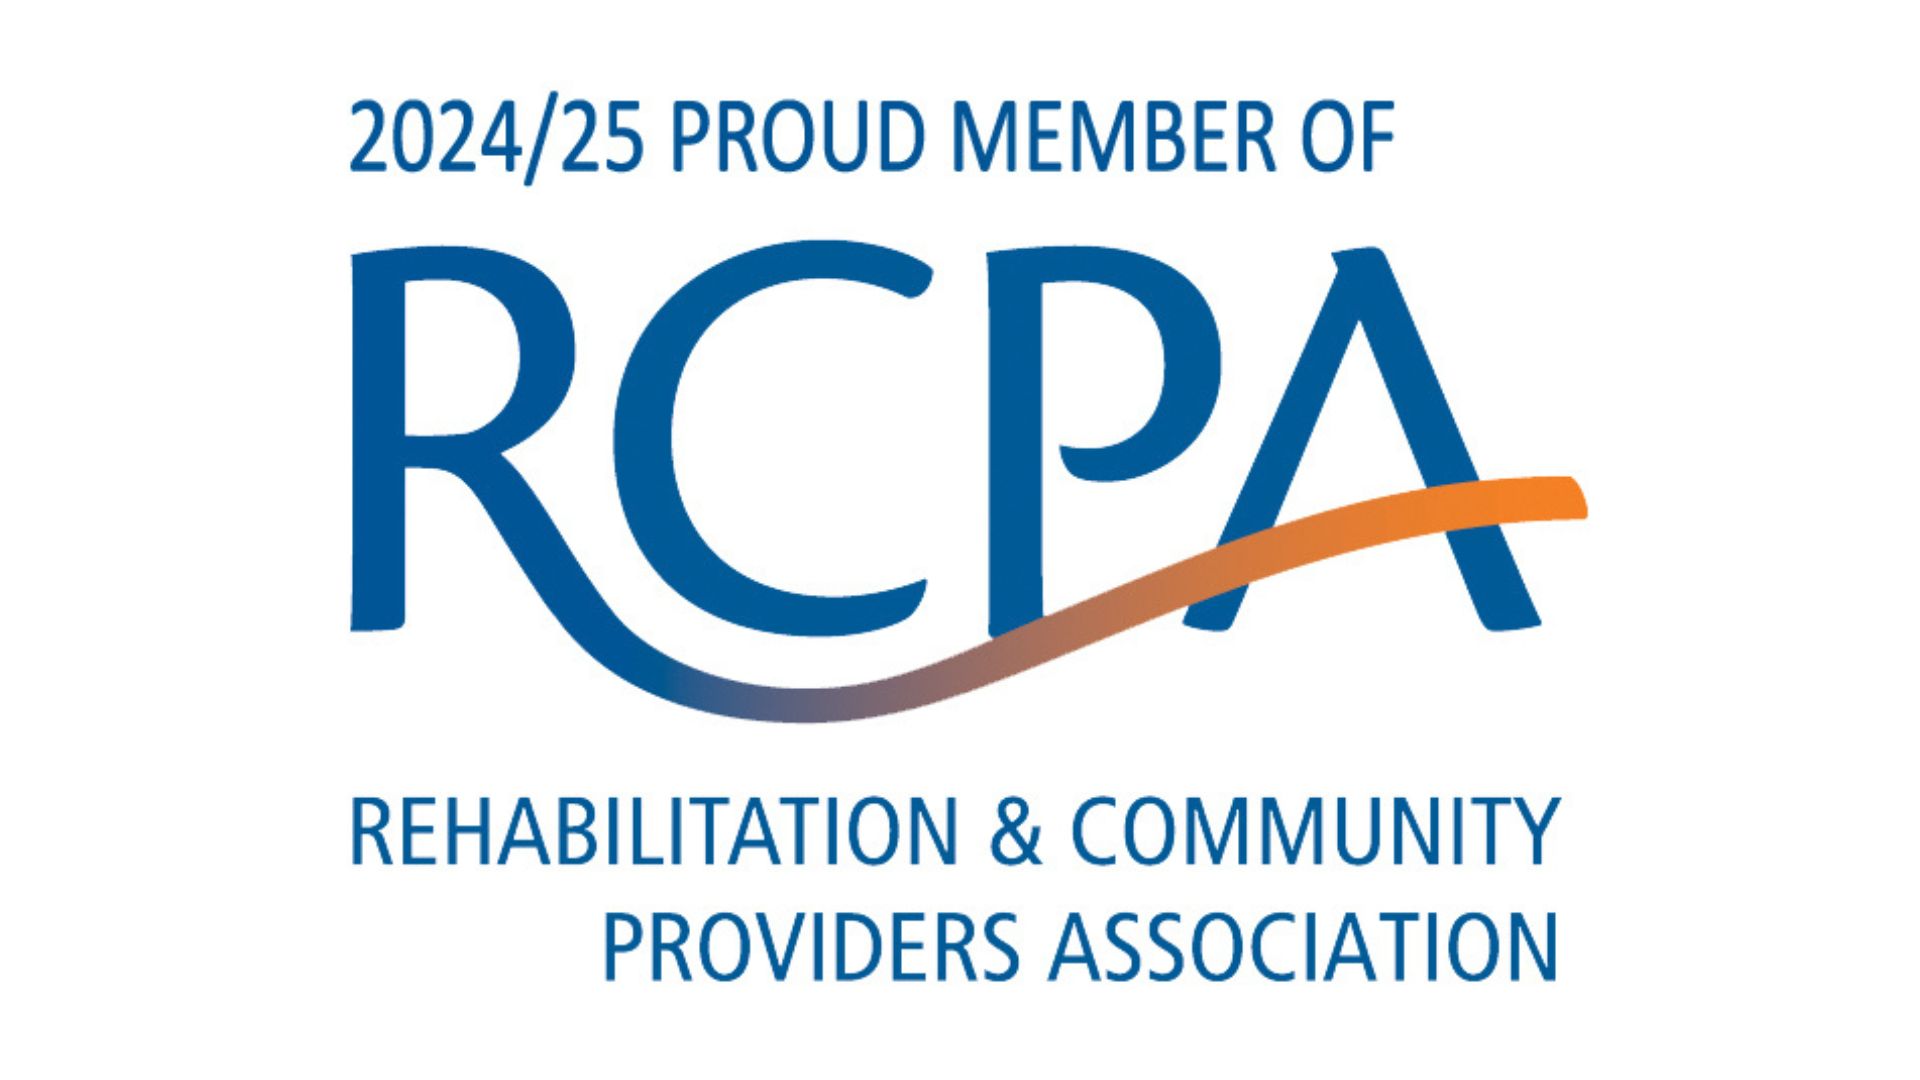 RCPA Rehabilitation and Community Providers Association member of 2024 to 2025